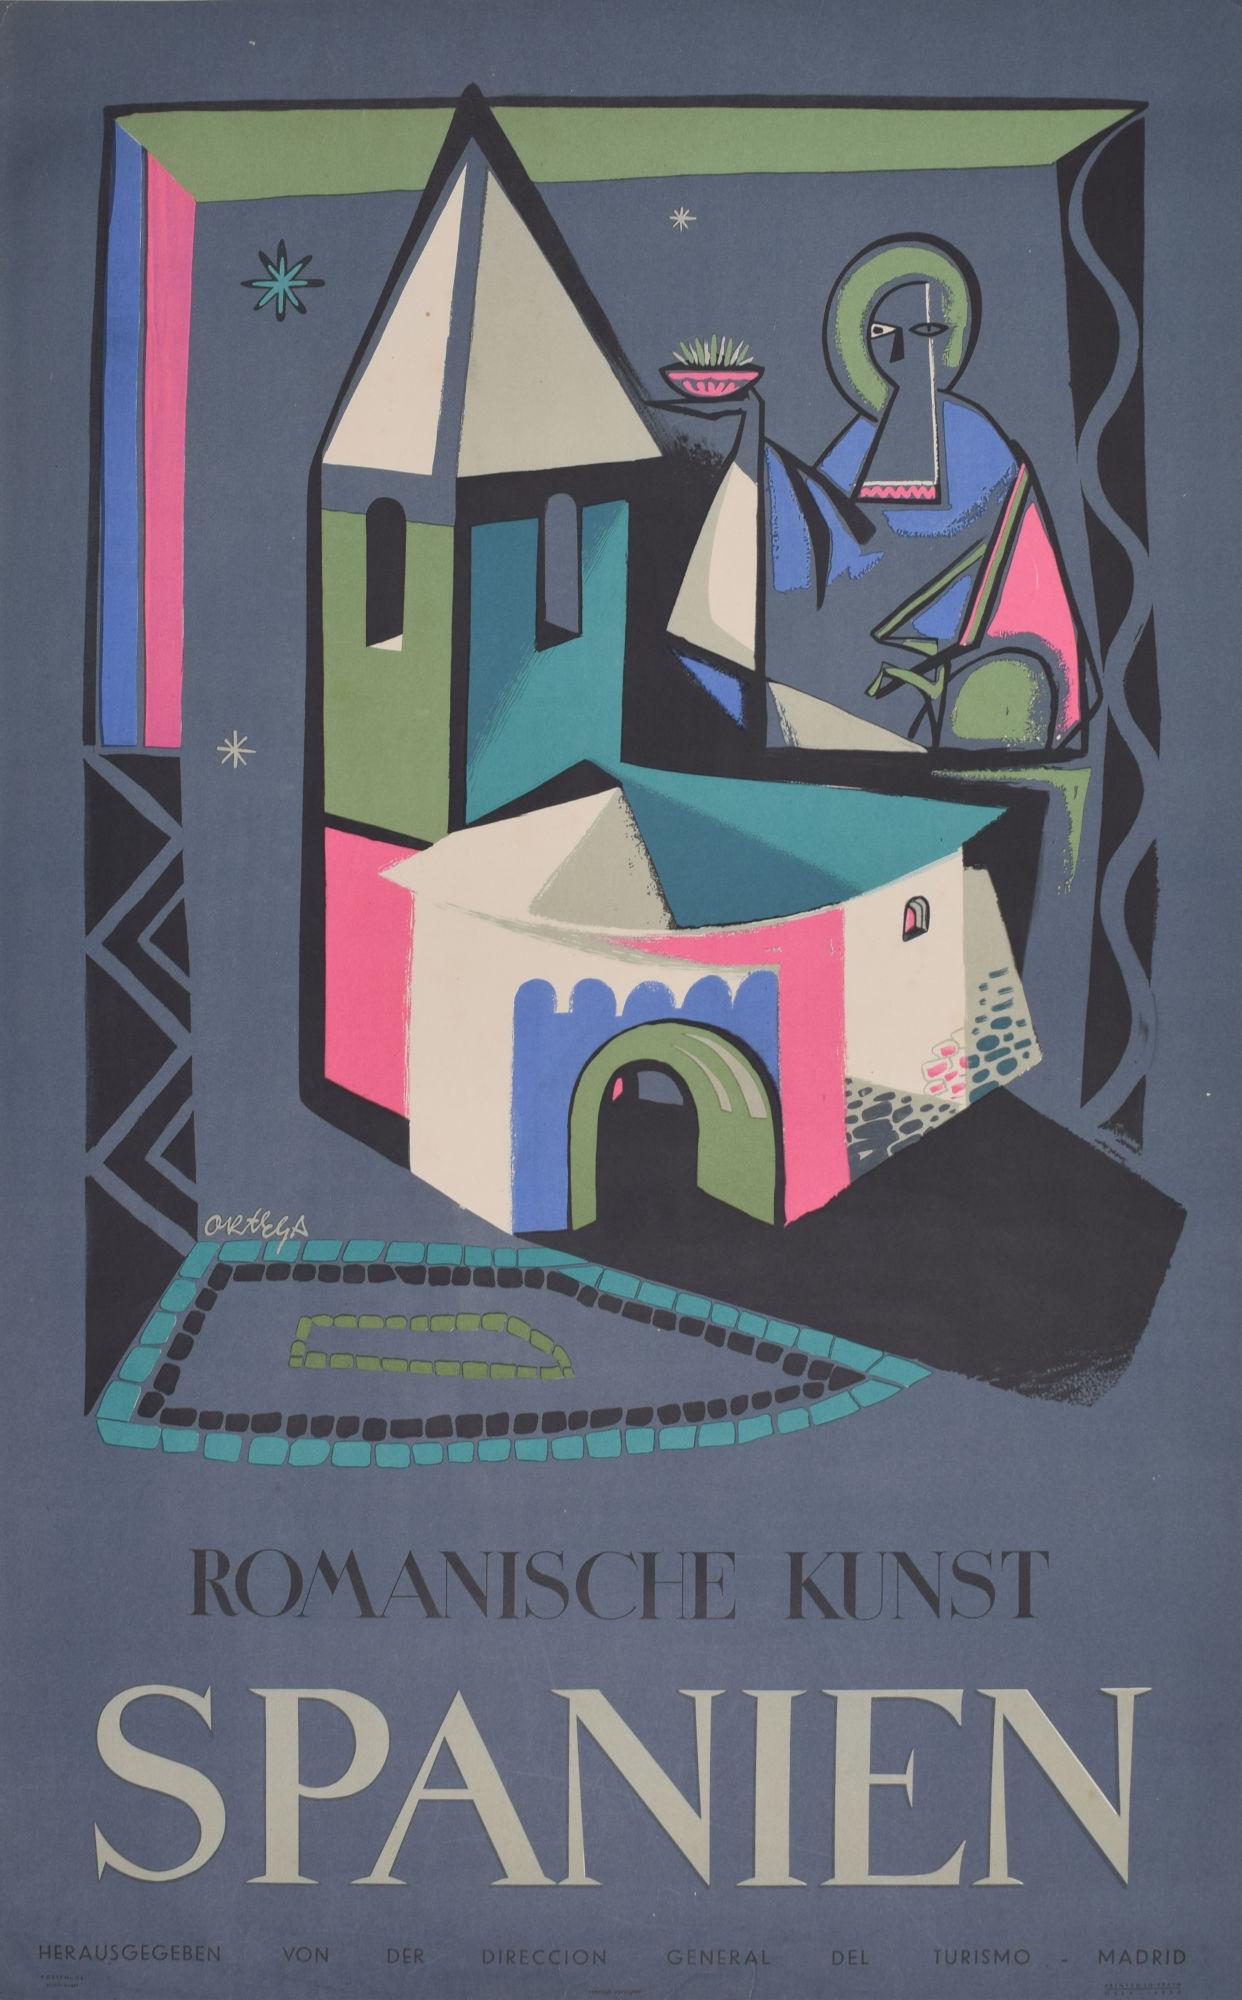 To see our other original vintage travel posters, scroll down to "More from this Seller" and below it click on "See all from this Seller", or send us a message if you cannot find the poster you want.

José Ortega (1921 - 1990)
Romanische Kunst